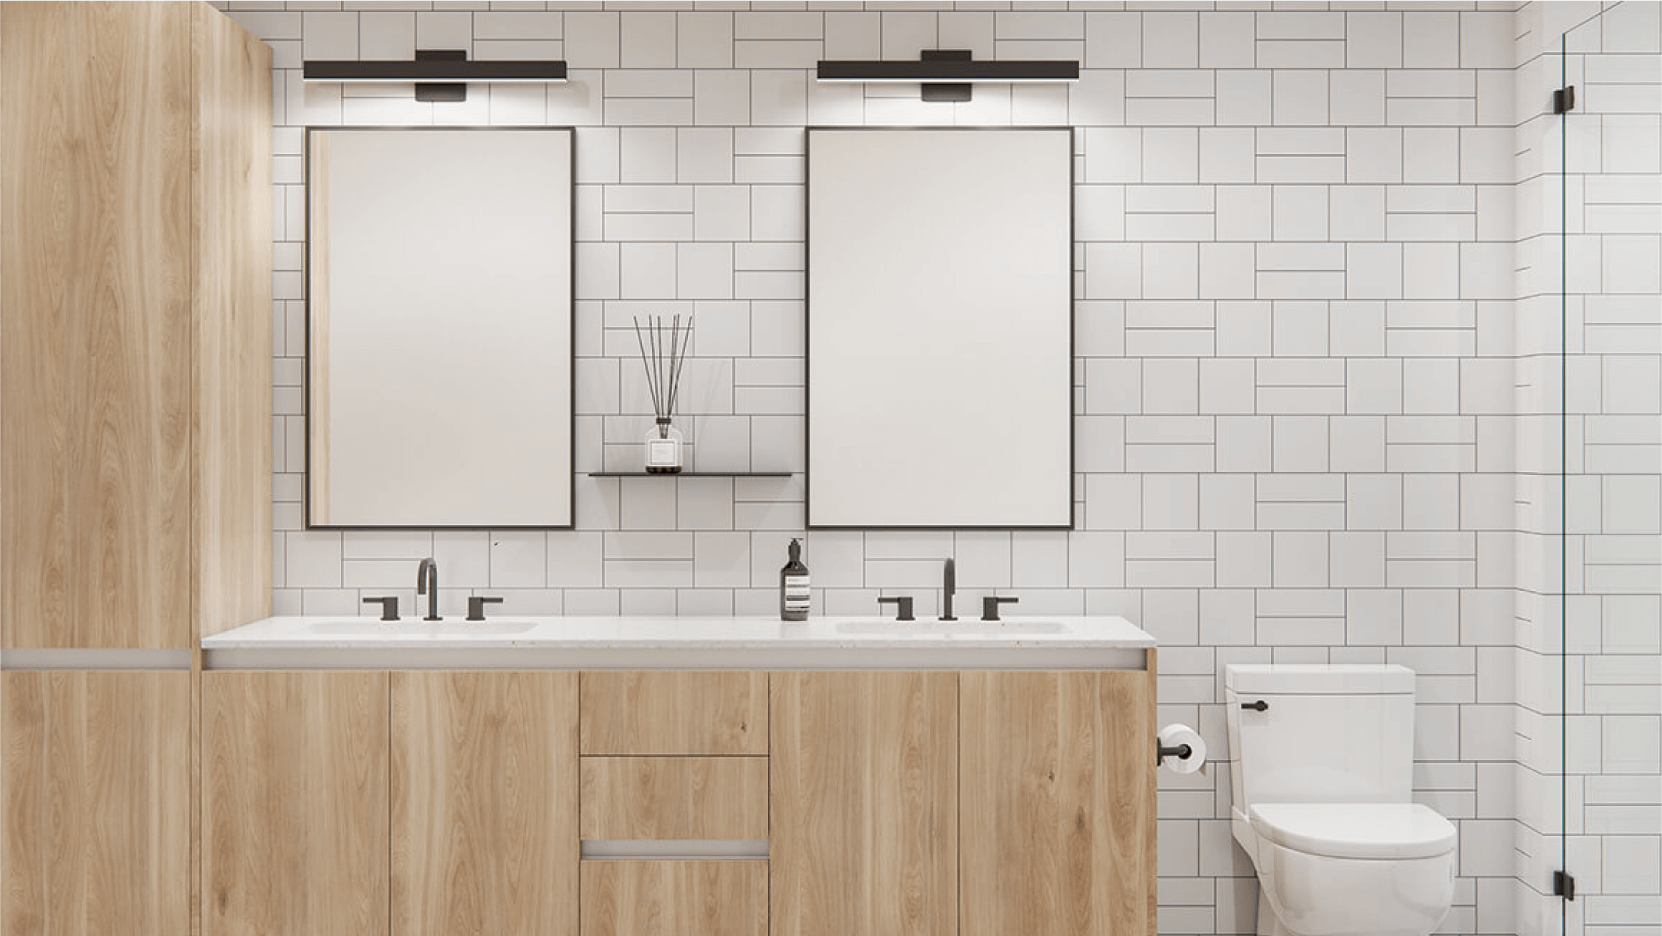 Contemporary bathroom showcasing a sleek design with light wooden vanity, white subway tiles, black framed mirrors, and minimalist decor.